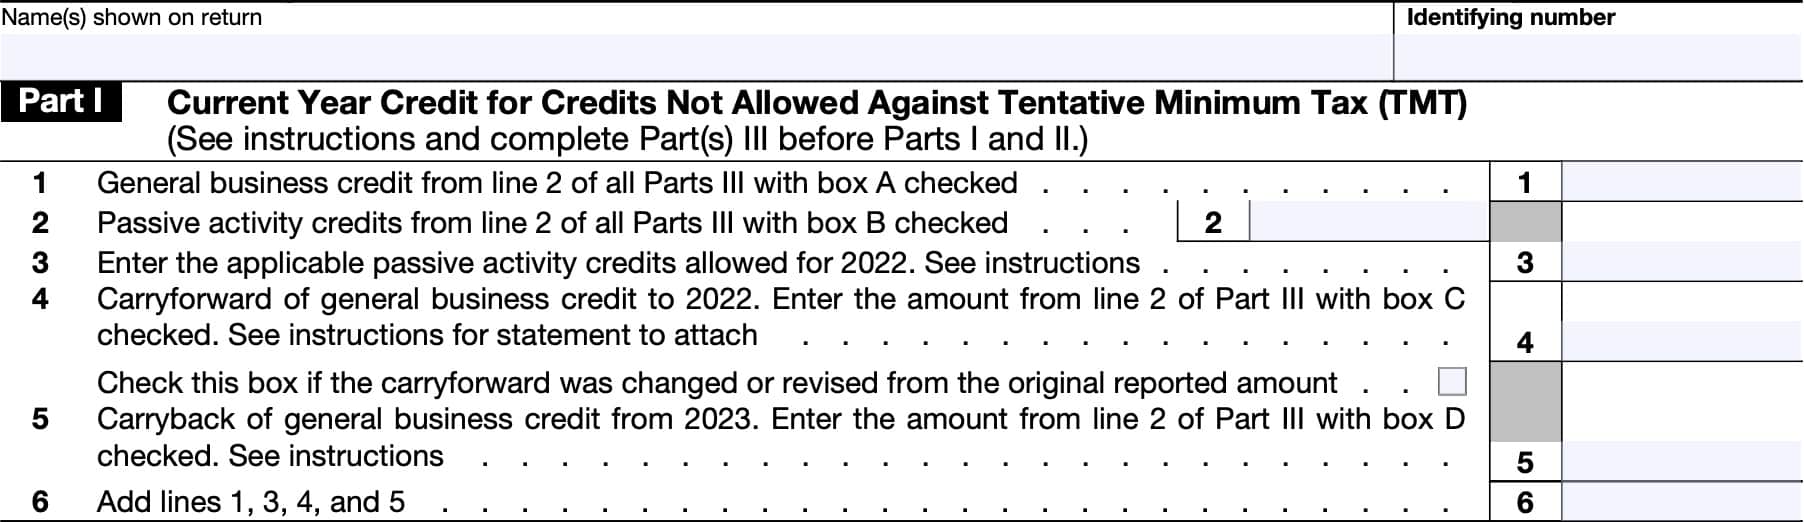 irs form 3800, part i: current year credit for credits not allowed against tmt